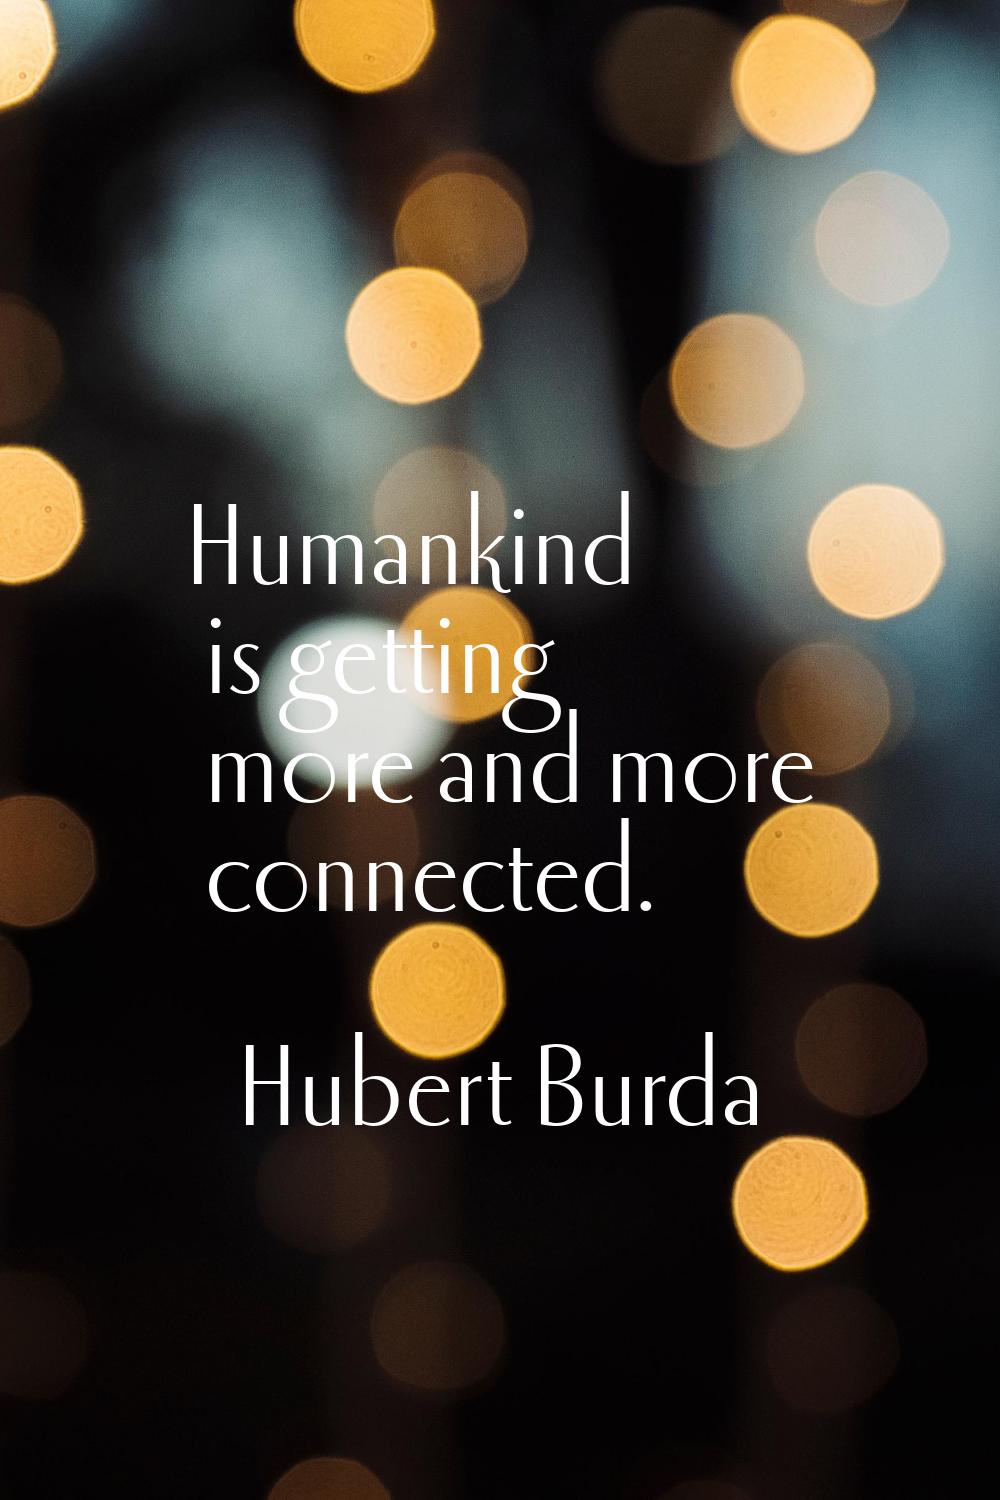 Humankind is getting more and more connected.